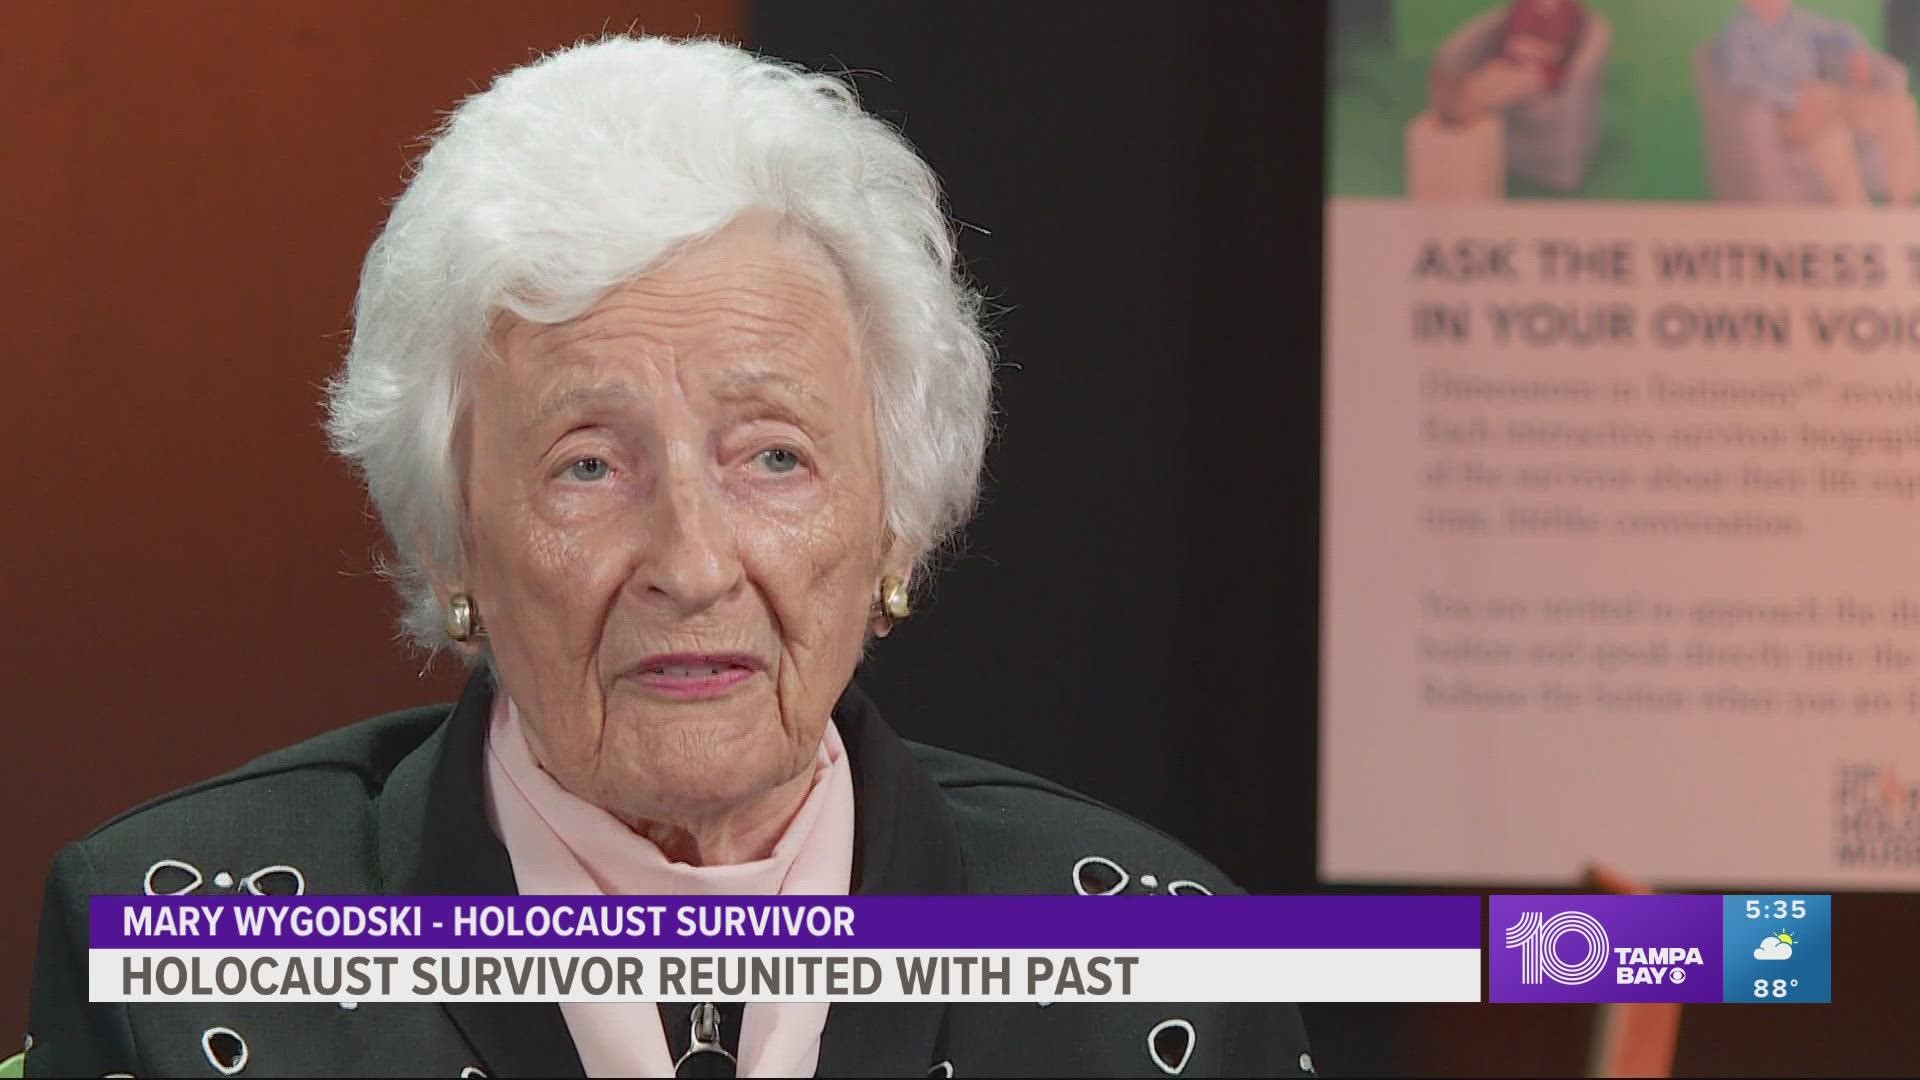 Mary Wygodski's story isn't unlike most other Holocaust survivors – chilling, inhumane, and gruesome. What's different is what she was able to claim back.